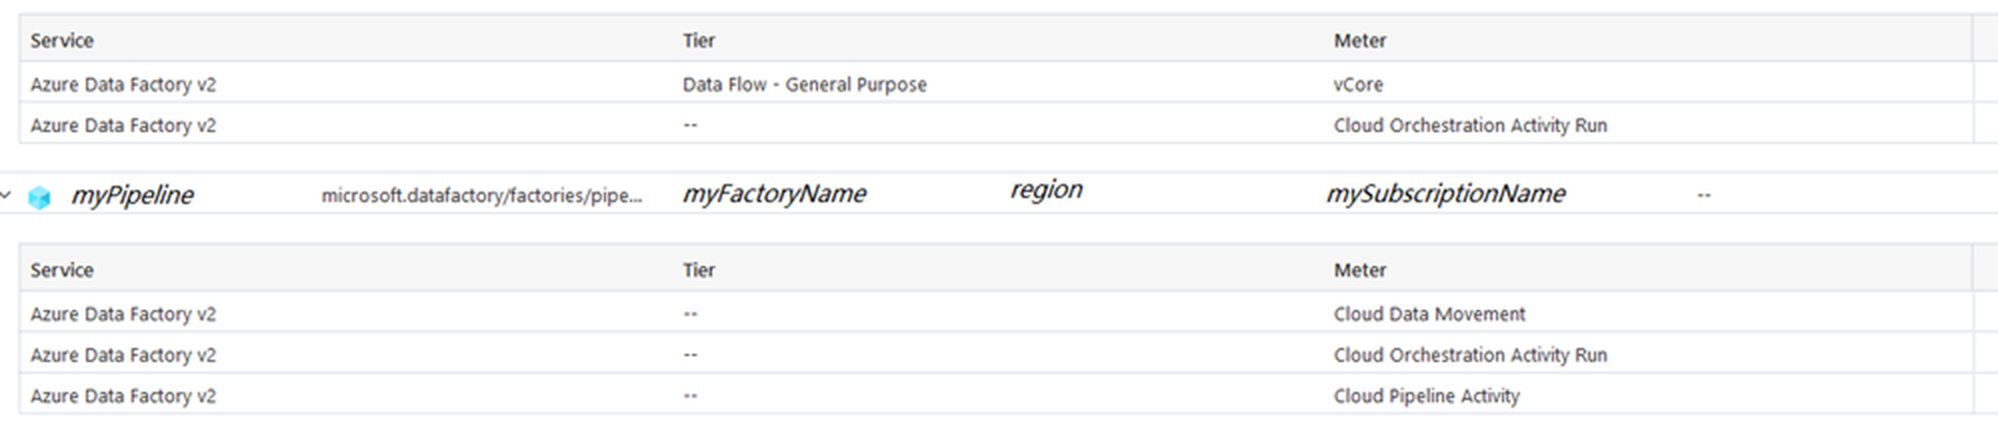 Screenshot showing the billing report for pipeline granular billing with a breakdown of costs per pipeline.